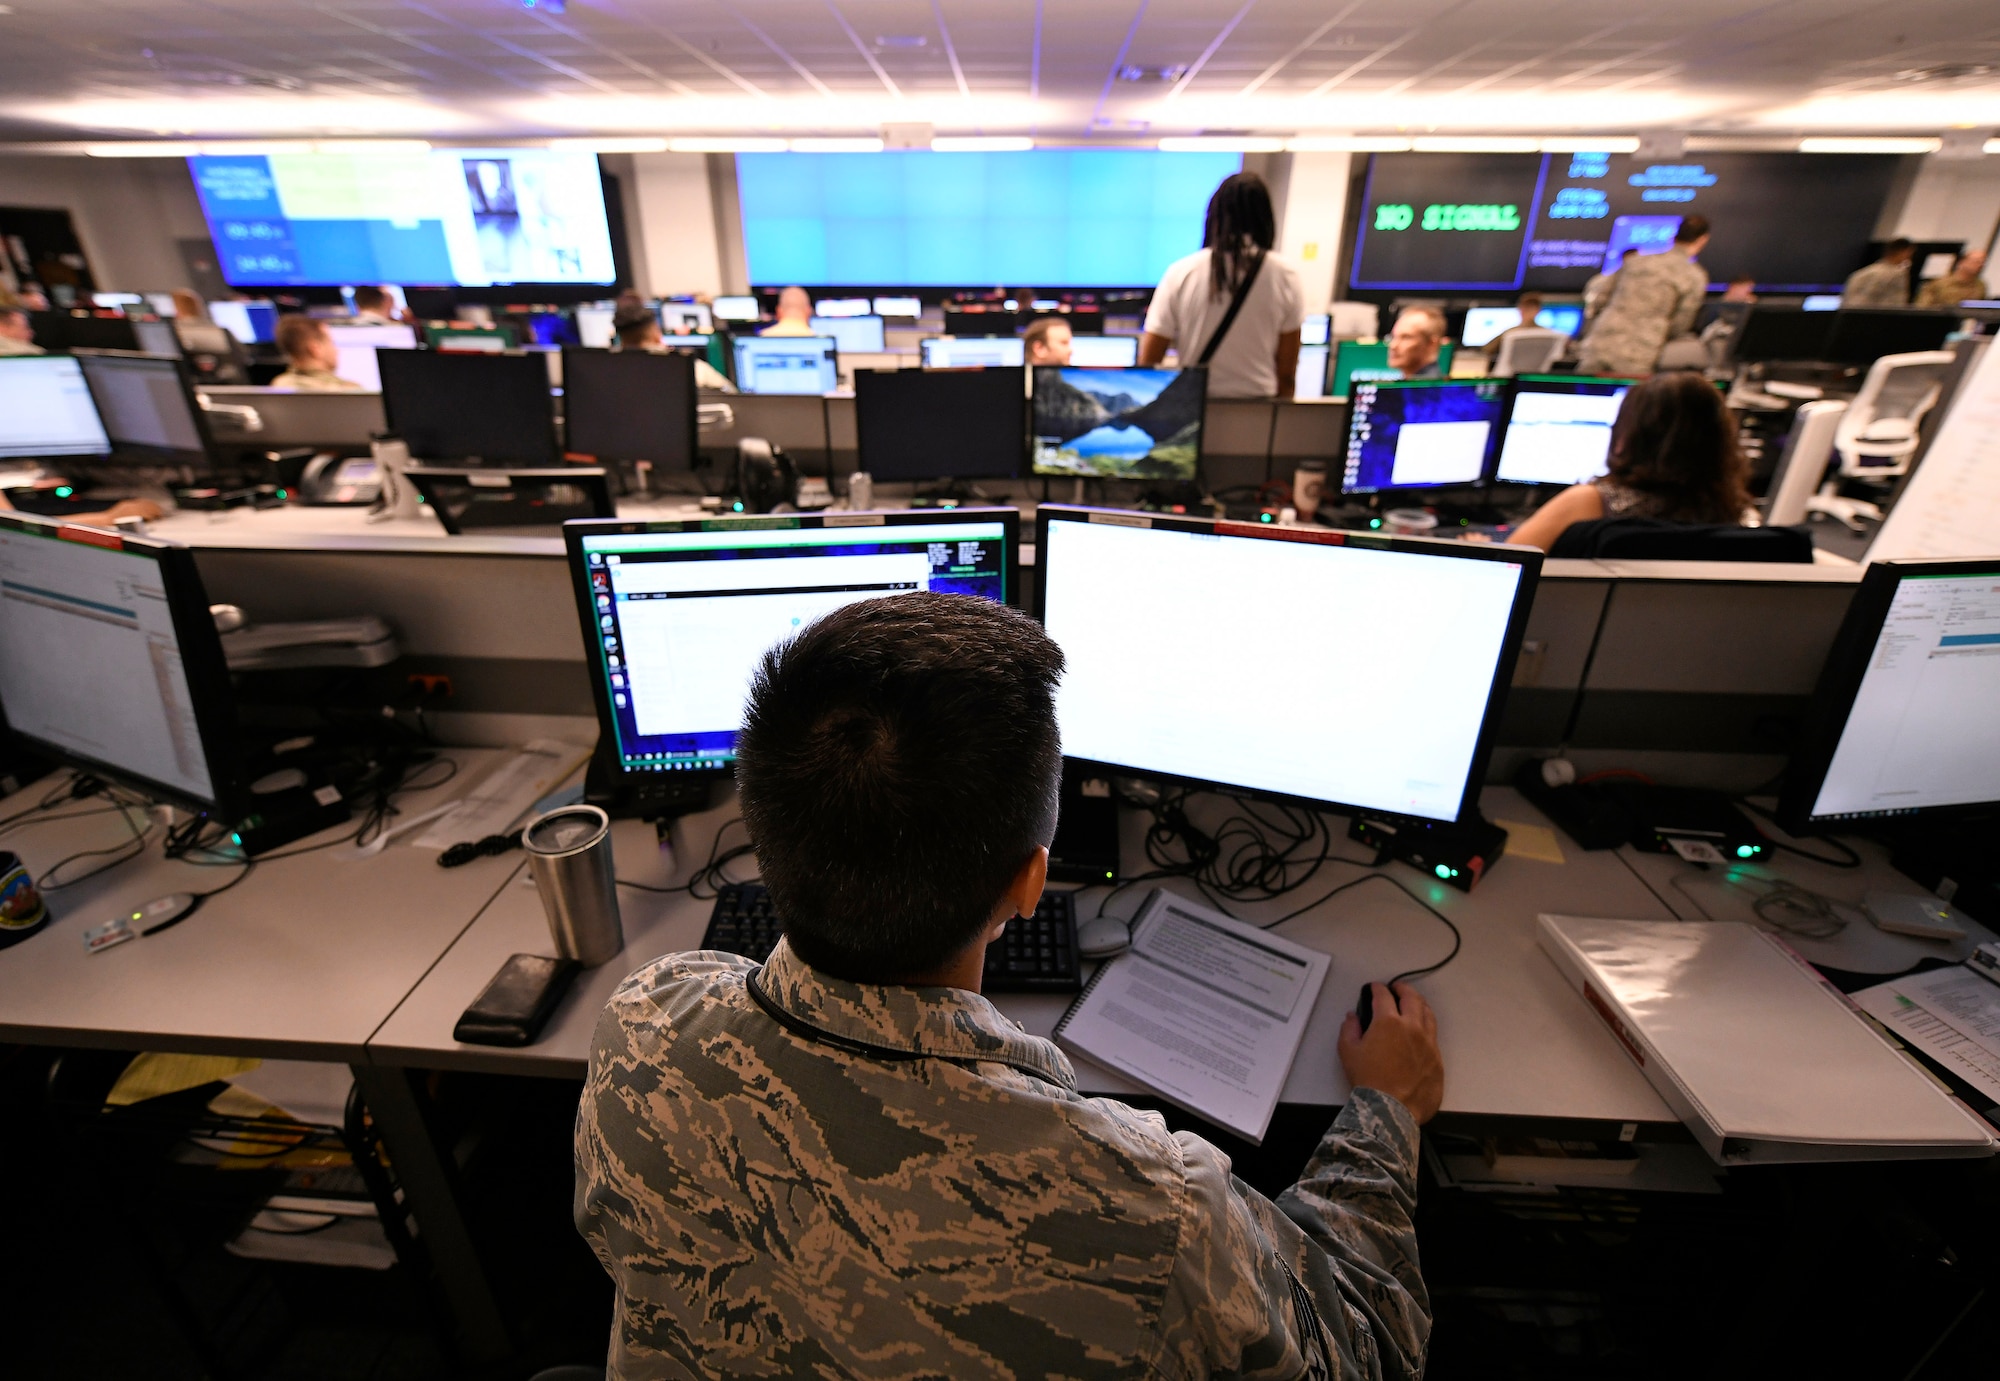 U.S. Air Force Airmen from the 33rd Network Warfare Squadron conduct cyber operations at Joint Base San Antonio-Lackland, Texas, Aug. 27, 2019. The 33rd NWS utilizes a cyber weapon system that employs more than 40 tools and applications. The “12N12” initiative aims to reduce this number to 12 in 12 months. (U.S. Air Force photo by Tech. Sgt. R.J. Biermann)